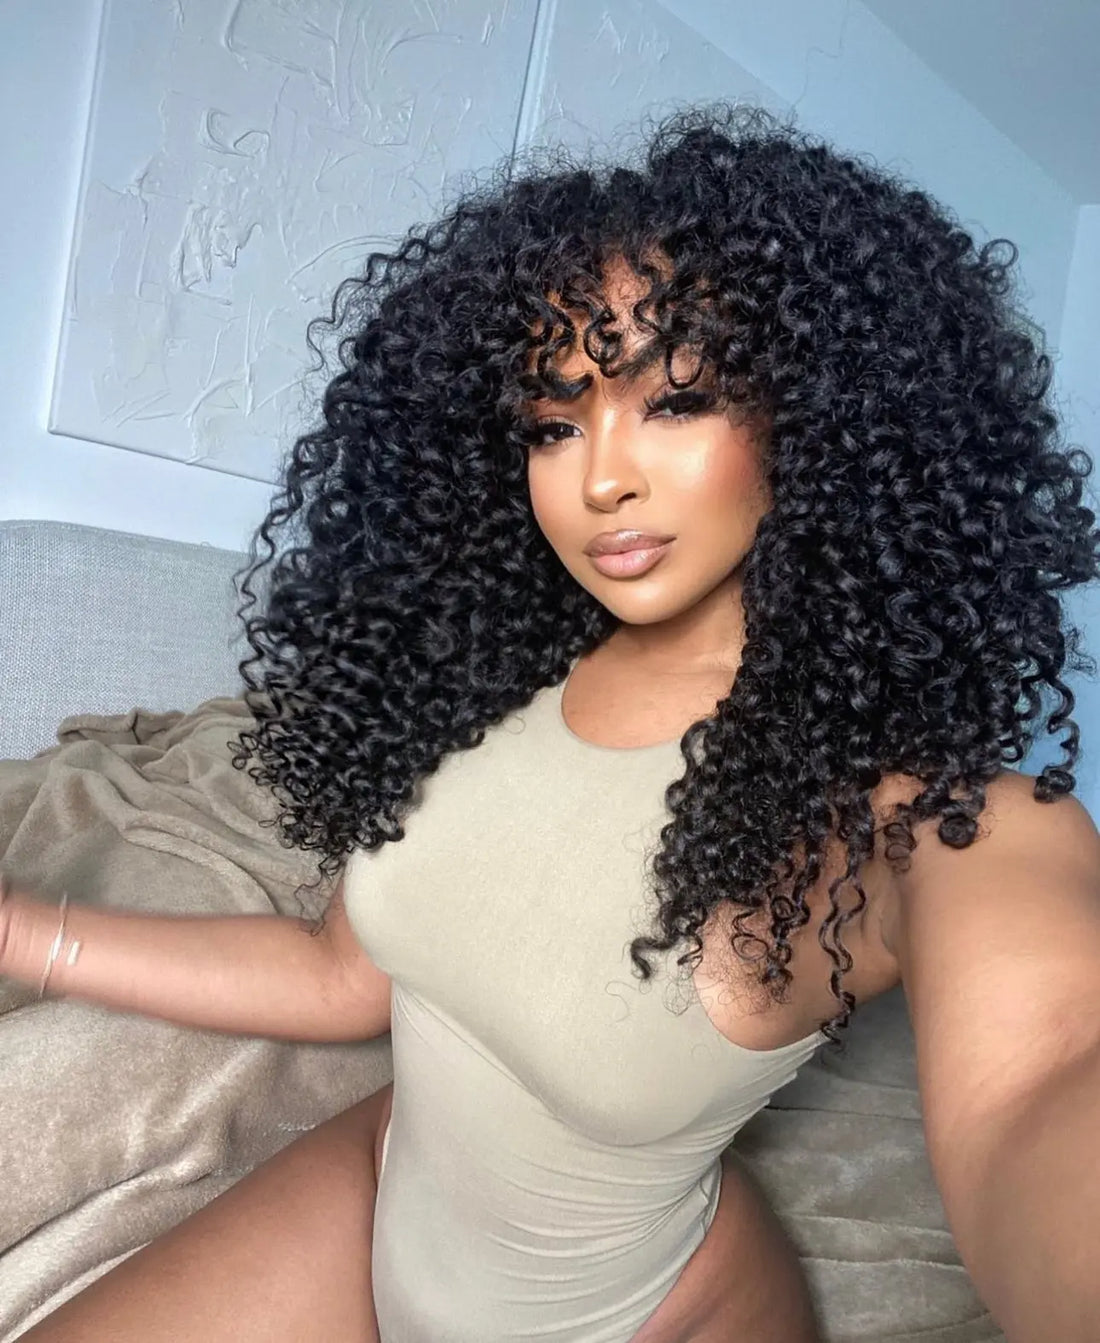 curly hair extensions,true and pure texture, curly hair extensions, deep curly extensions, best curly hair extensions, raw curly hair 